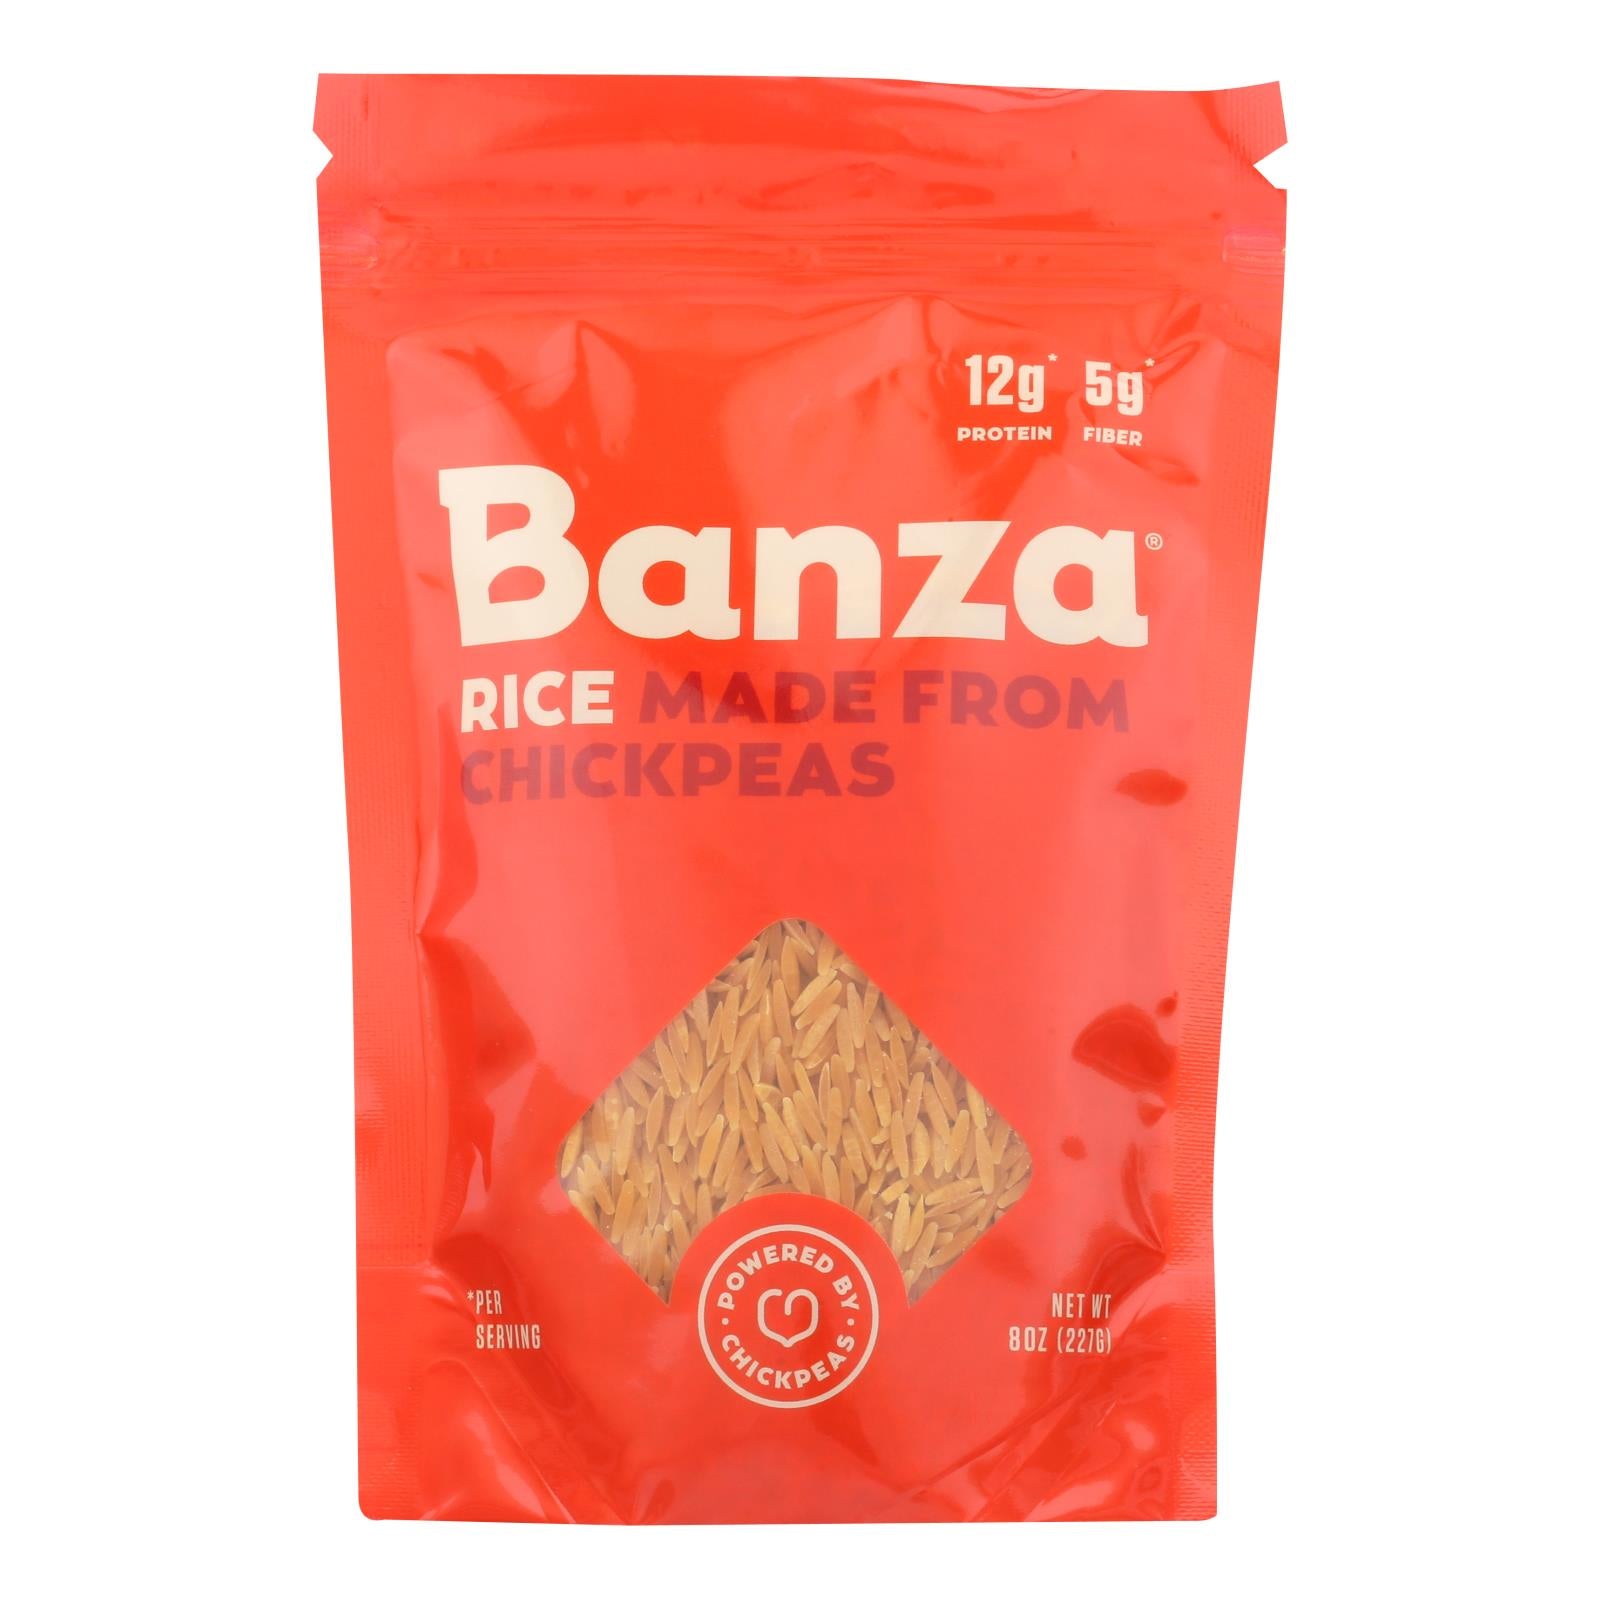 Banza, Banza - Rice Chickpea - Case of 6 - 8 OZ (Pack of 6)